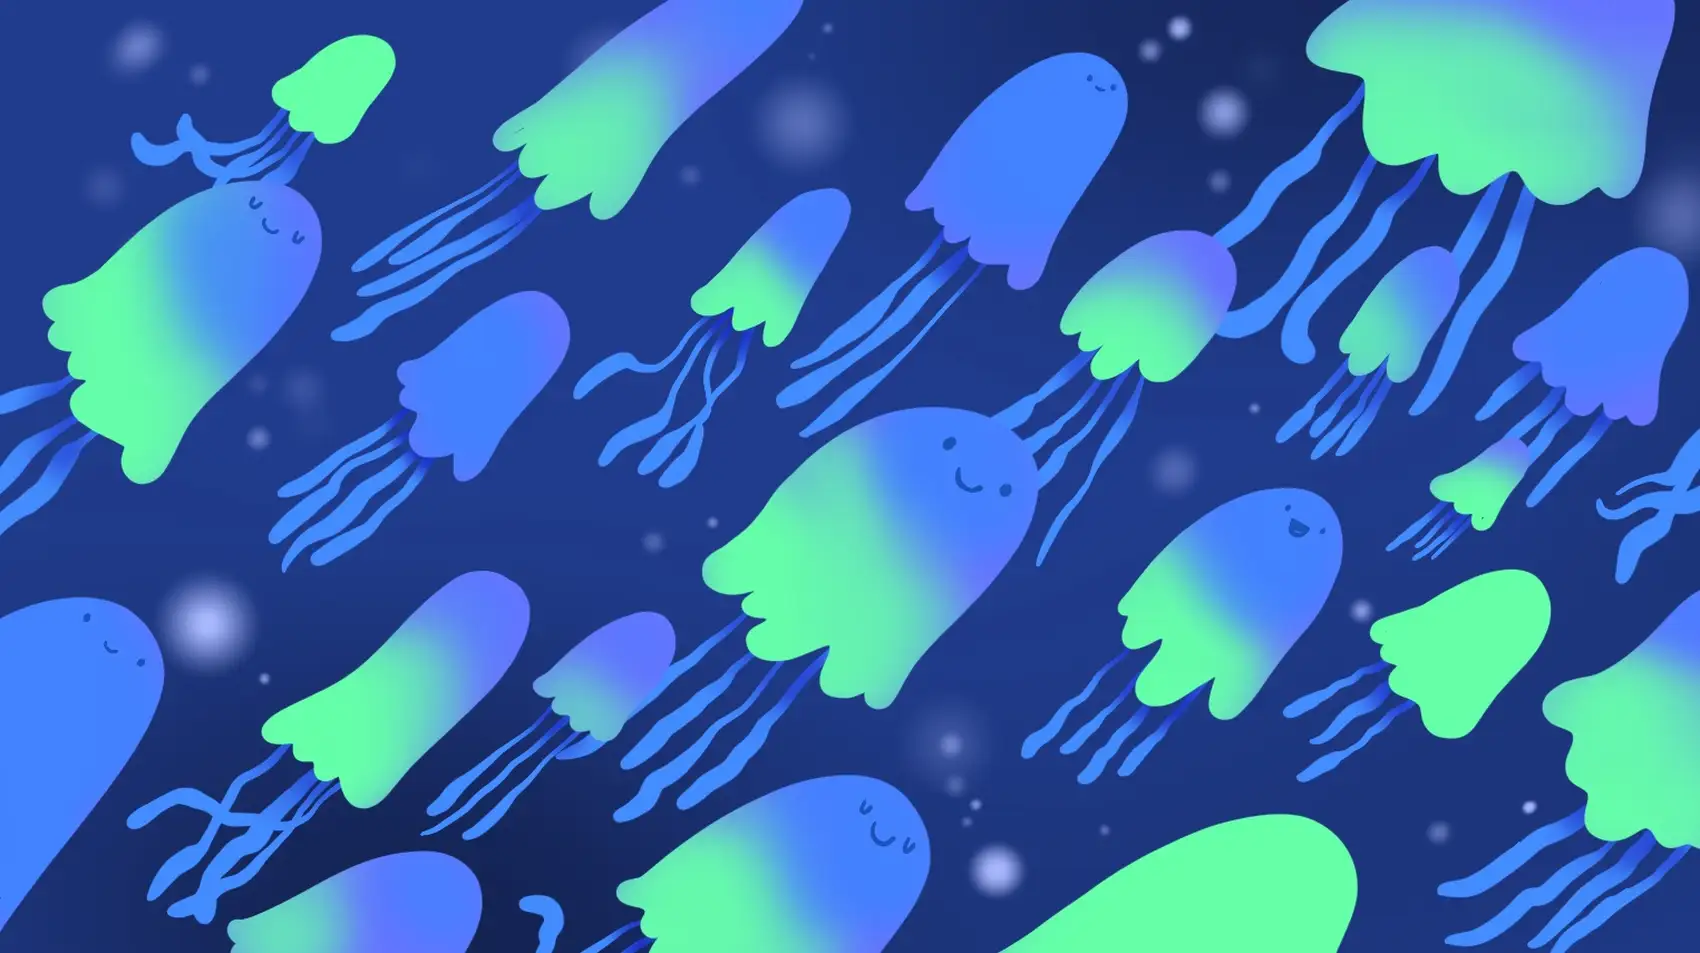 Multiple blue-green jellyfishes swimming up in a dark blue background.